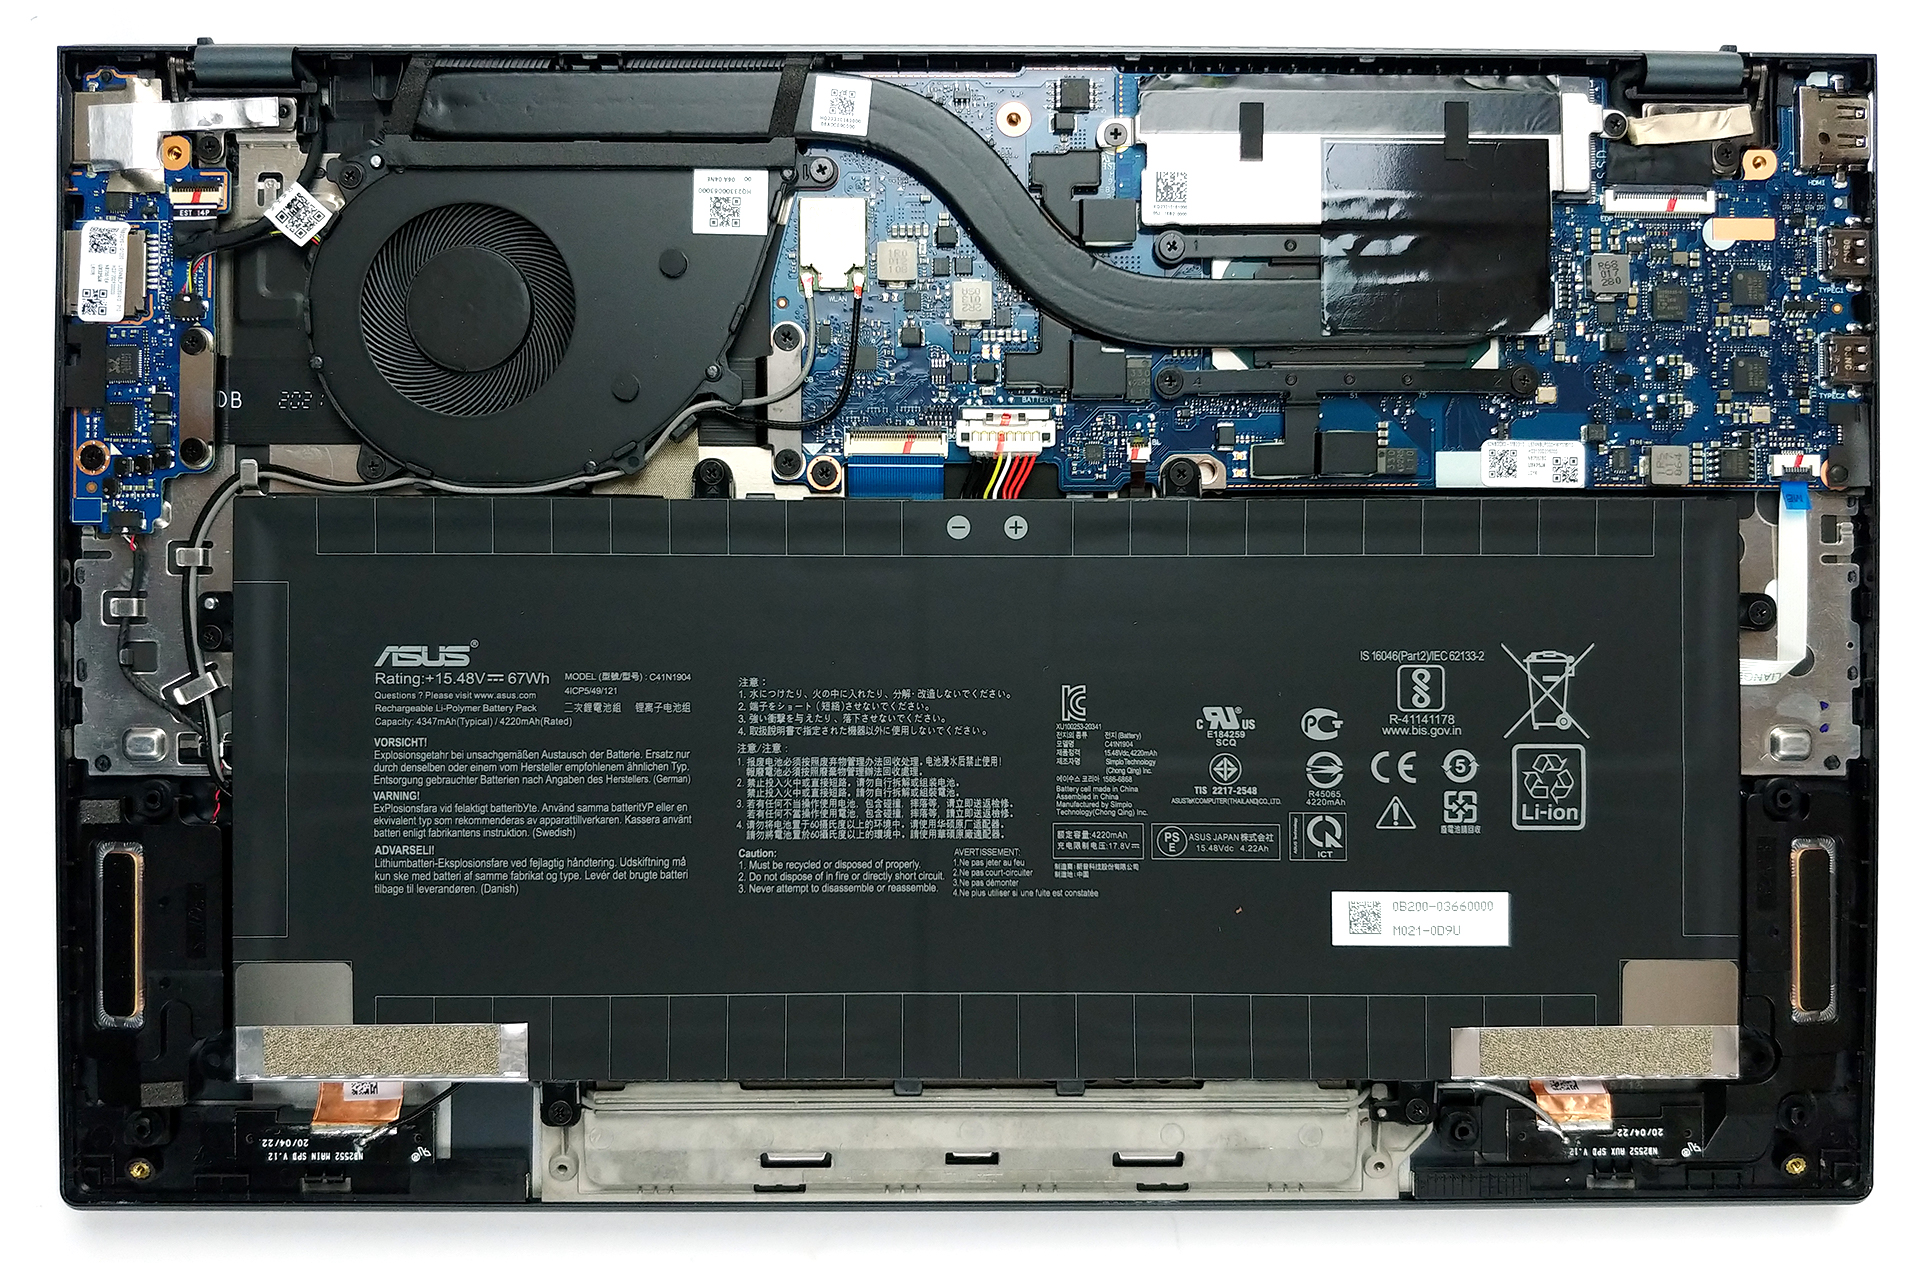 ASUS ZenBook 14 UX425 - disassembly and upgrade options | LaptopMedia.com